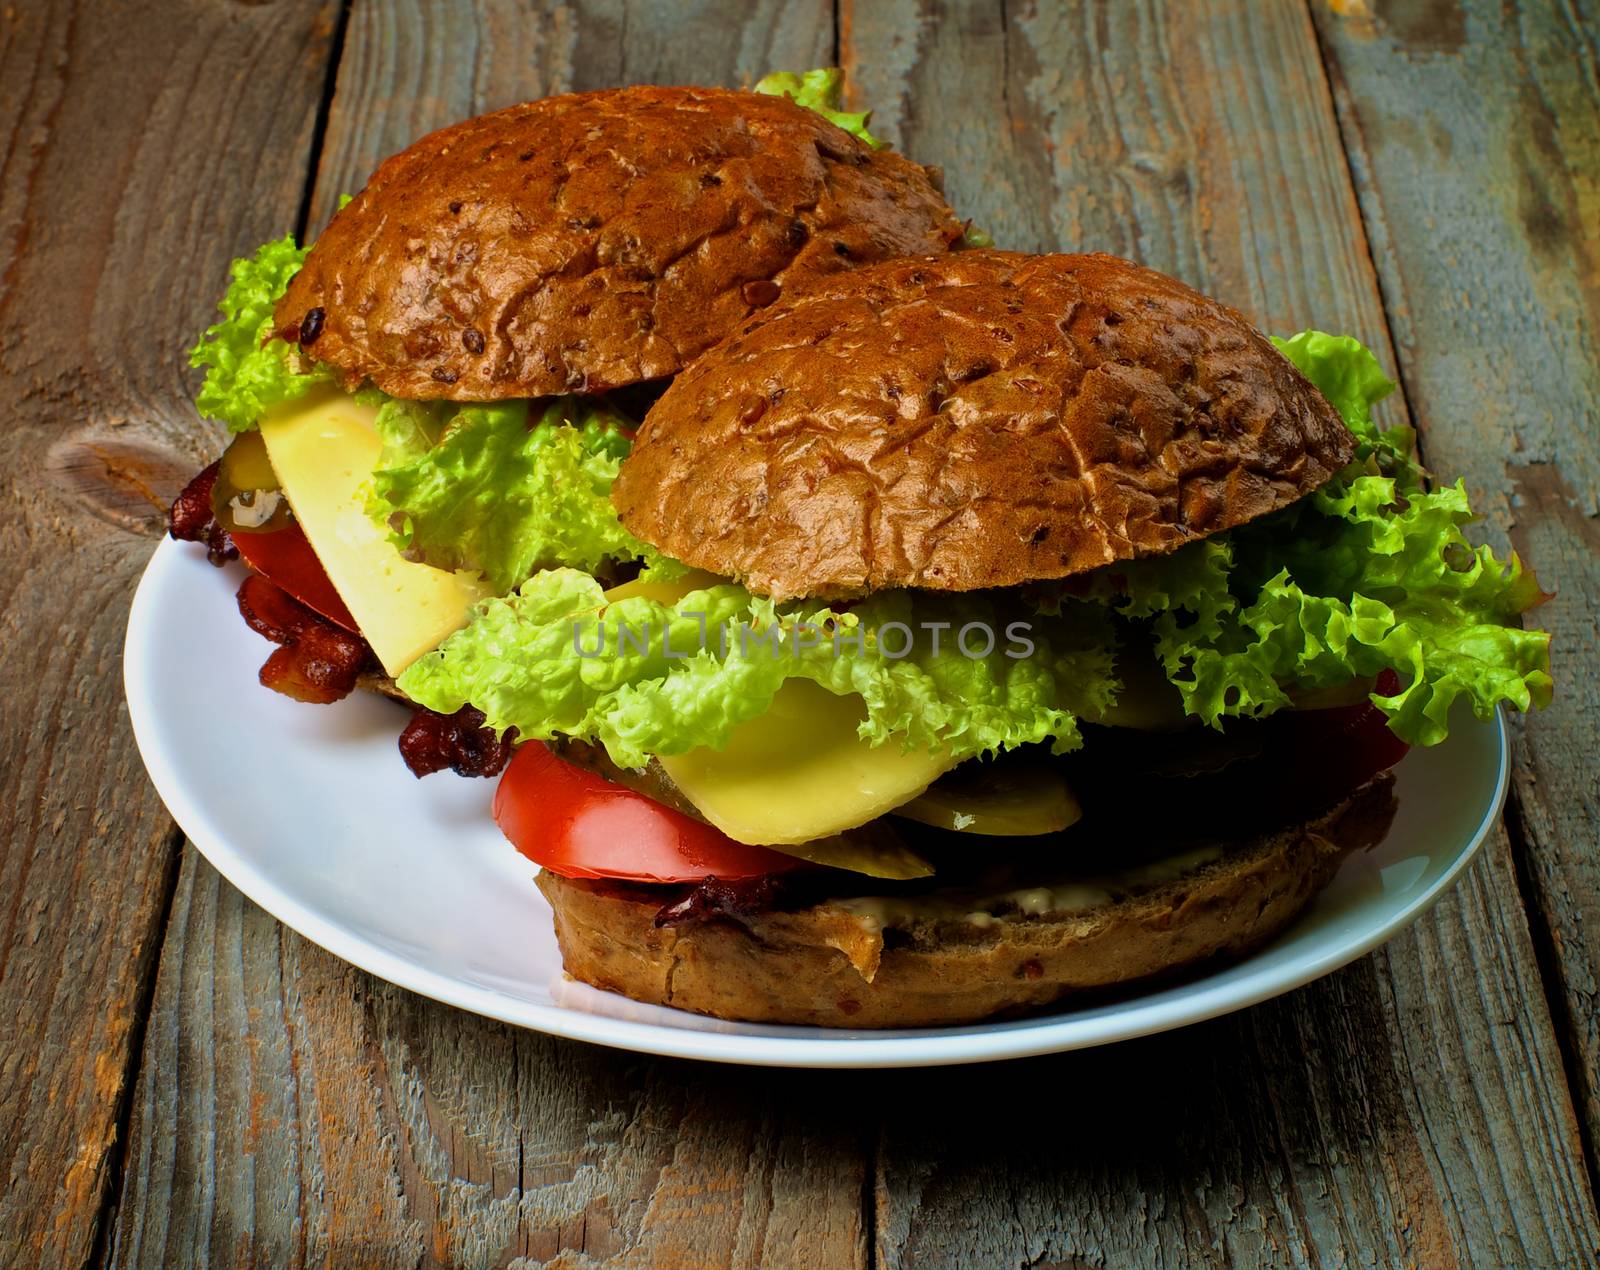 Homemade Hamburgers with Bacon Lettuce,Tomato, Onions, Cheese, and Pickled Cucumber with Whole Wheat Bun on White Plate closeup on Rustic Wooden background